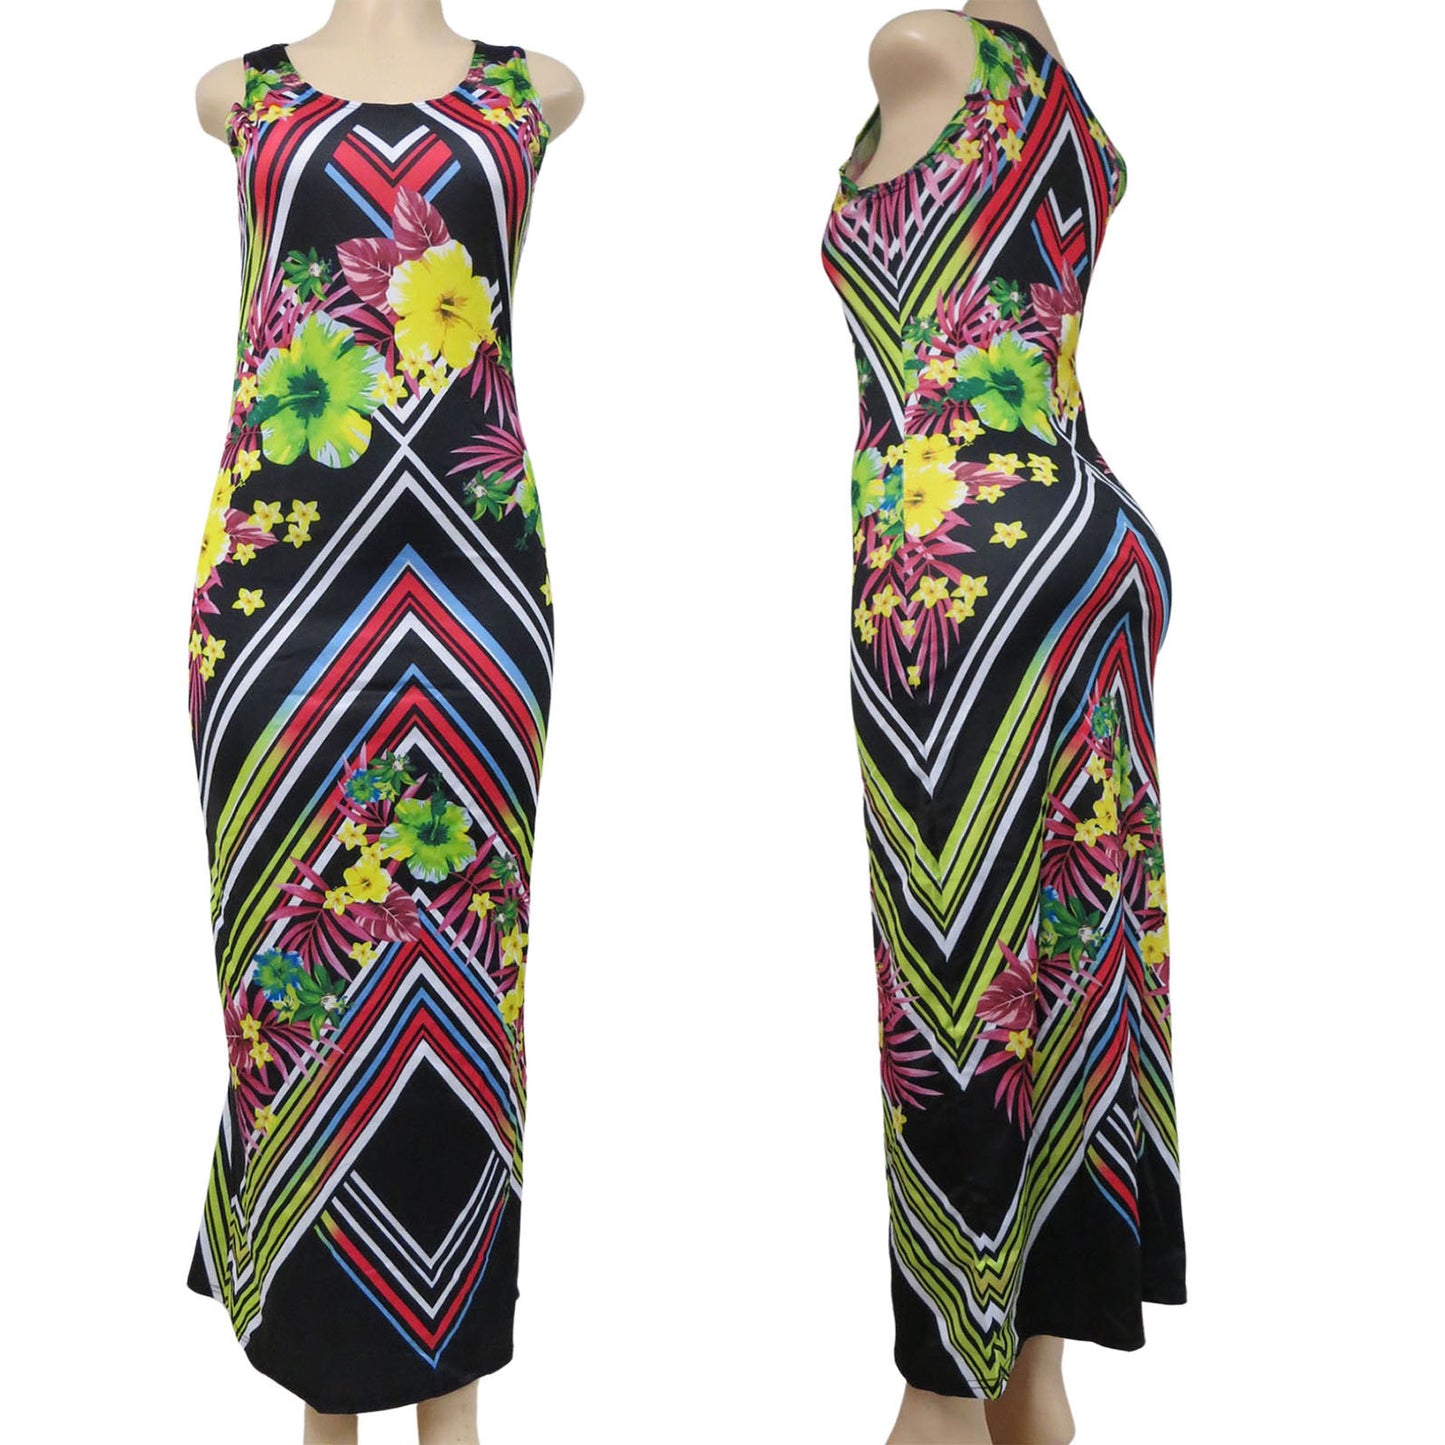 wholesale long sleeveless dress for women in an abstract pattern in black with yellow green pink and blue accents